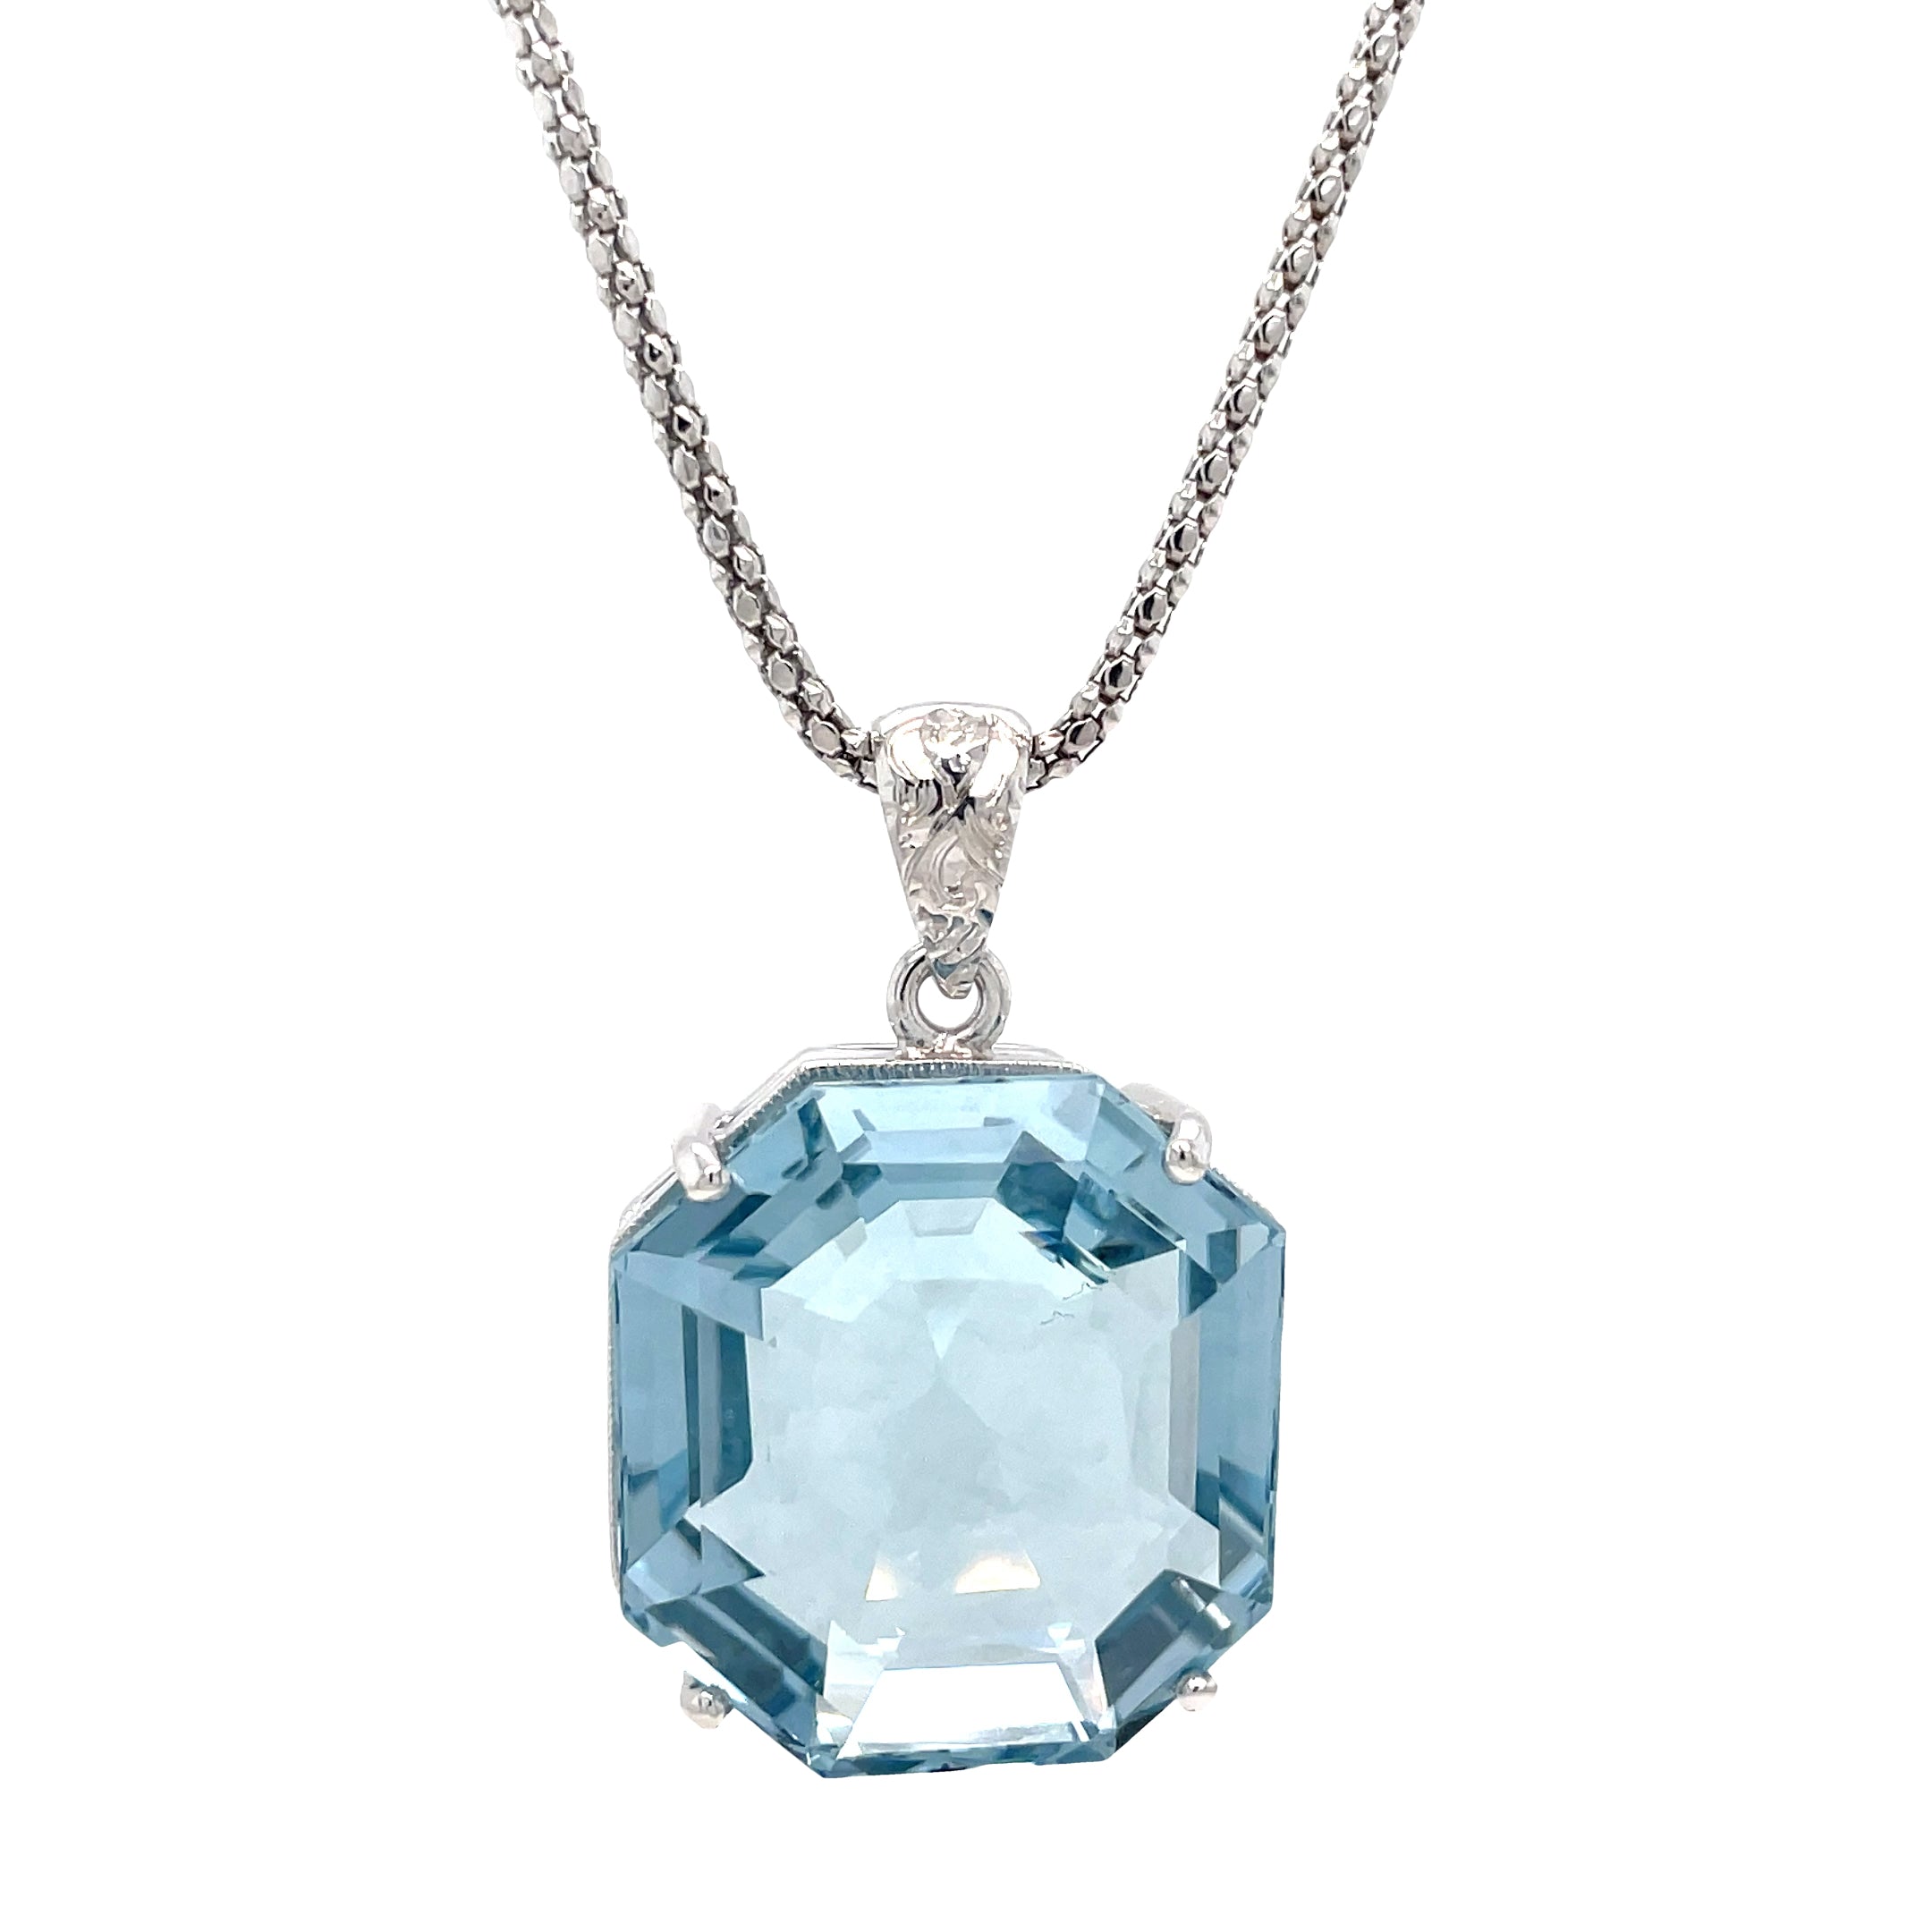 Expertly designed and crafted, our Aquamarine &amp; Diamond Necklace features a stunning octahedron aquamarine with a diamond bail. The custom-made white gold mounting adds a touch of elegance and is complemented by an Italian-made chain. Elevate any outfit with this eye-catching necklace. Chain is optional 20" long ($550)